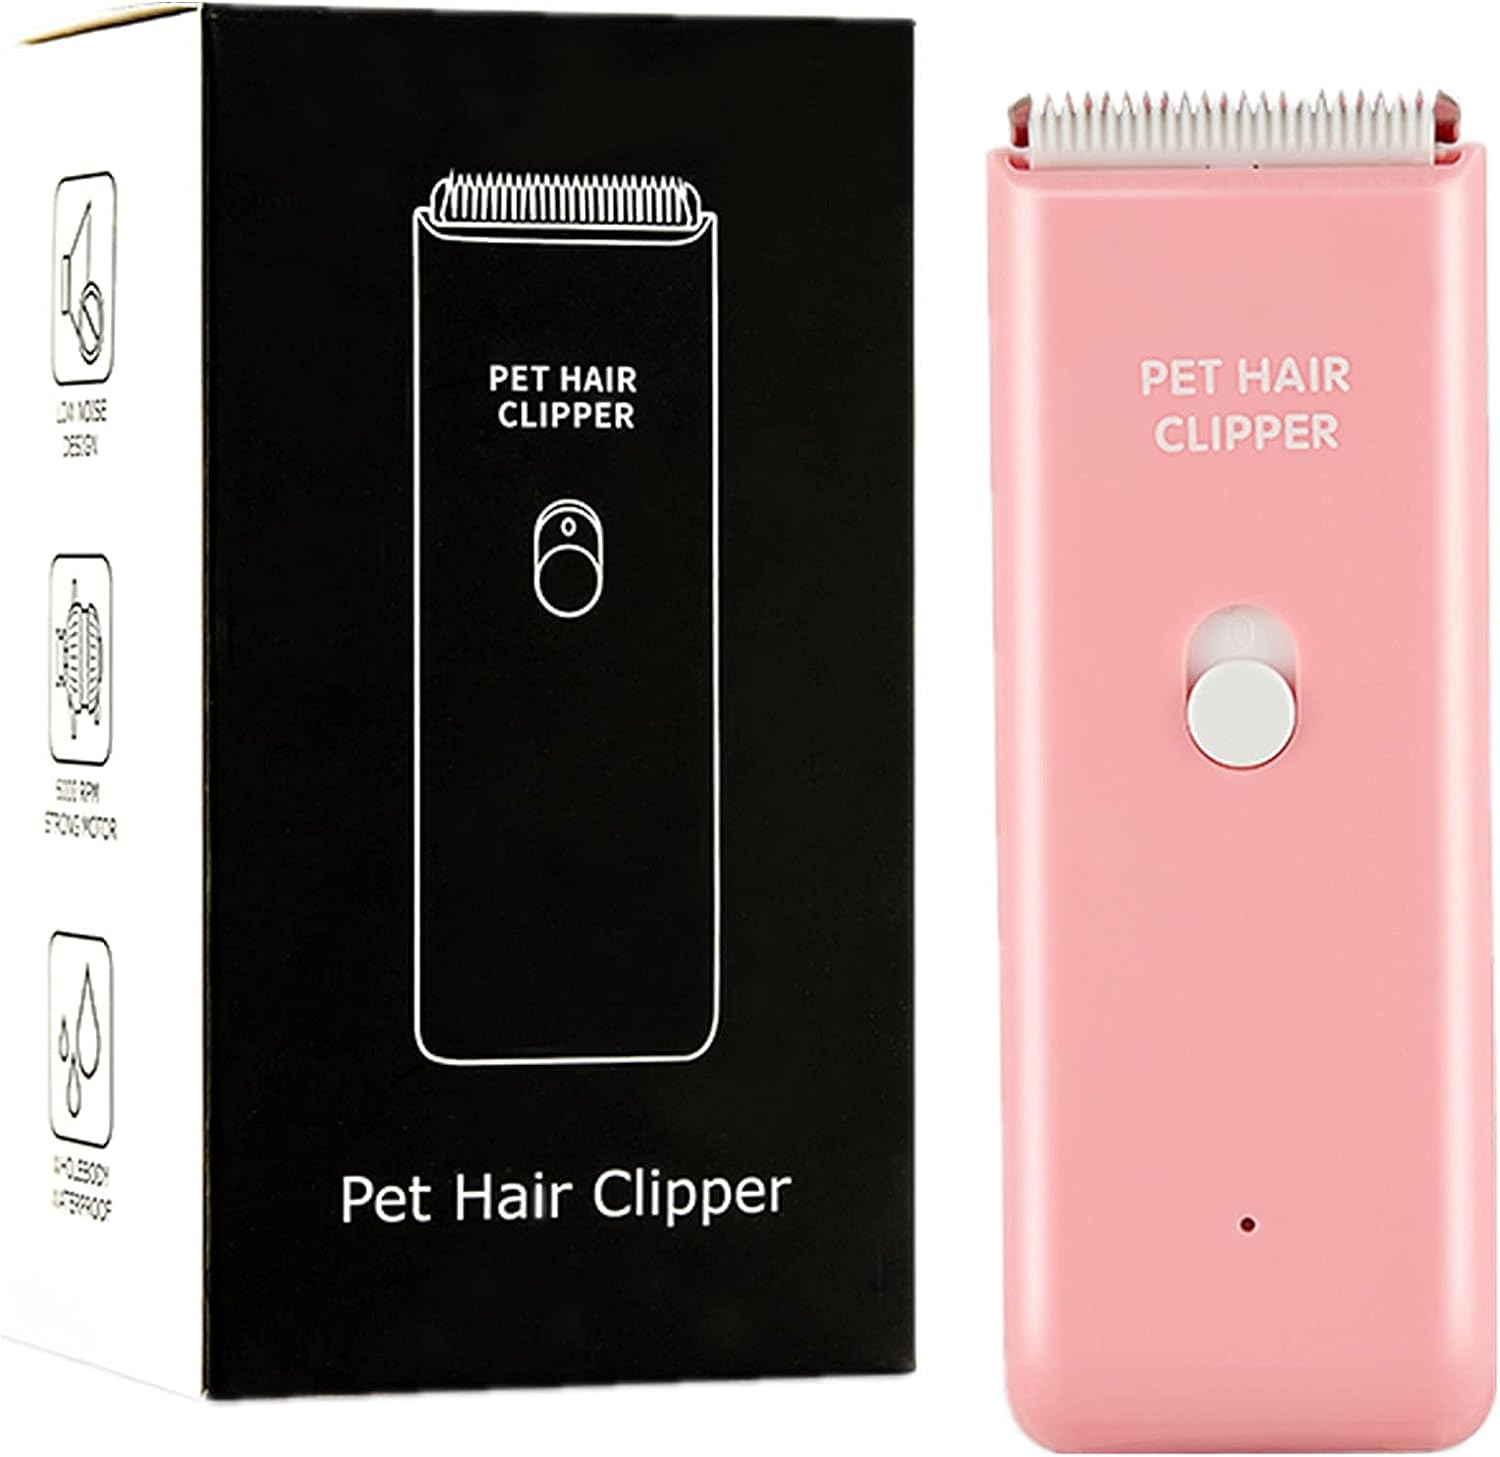 You are currently viewing Portable Electric Pet Grooming Tools Review